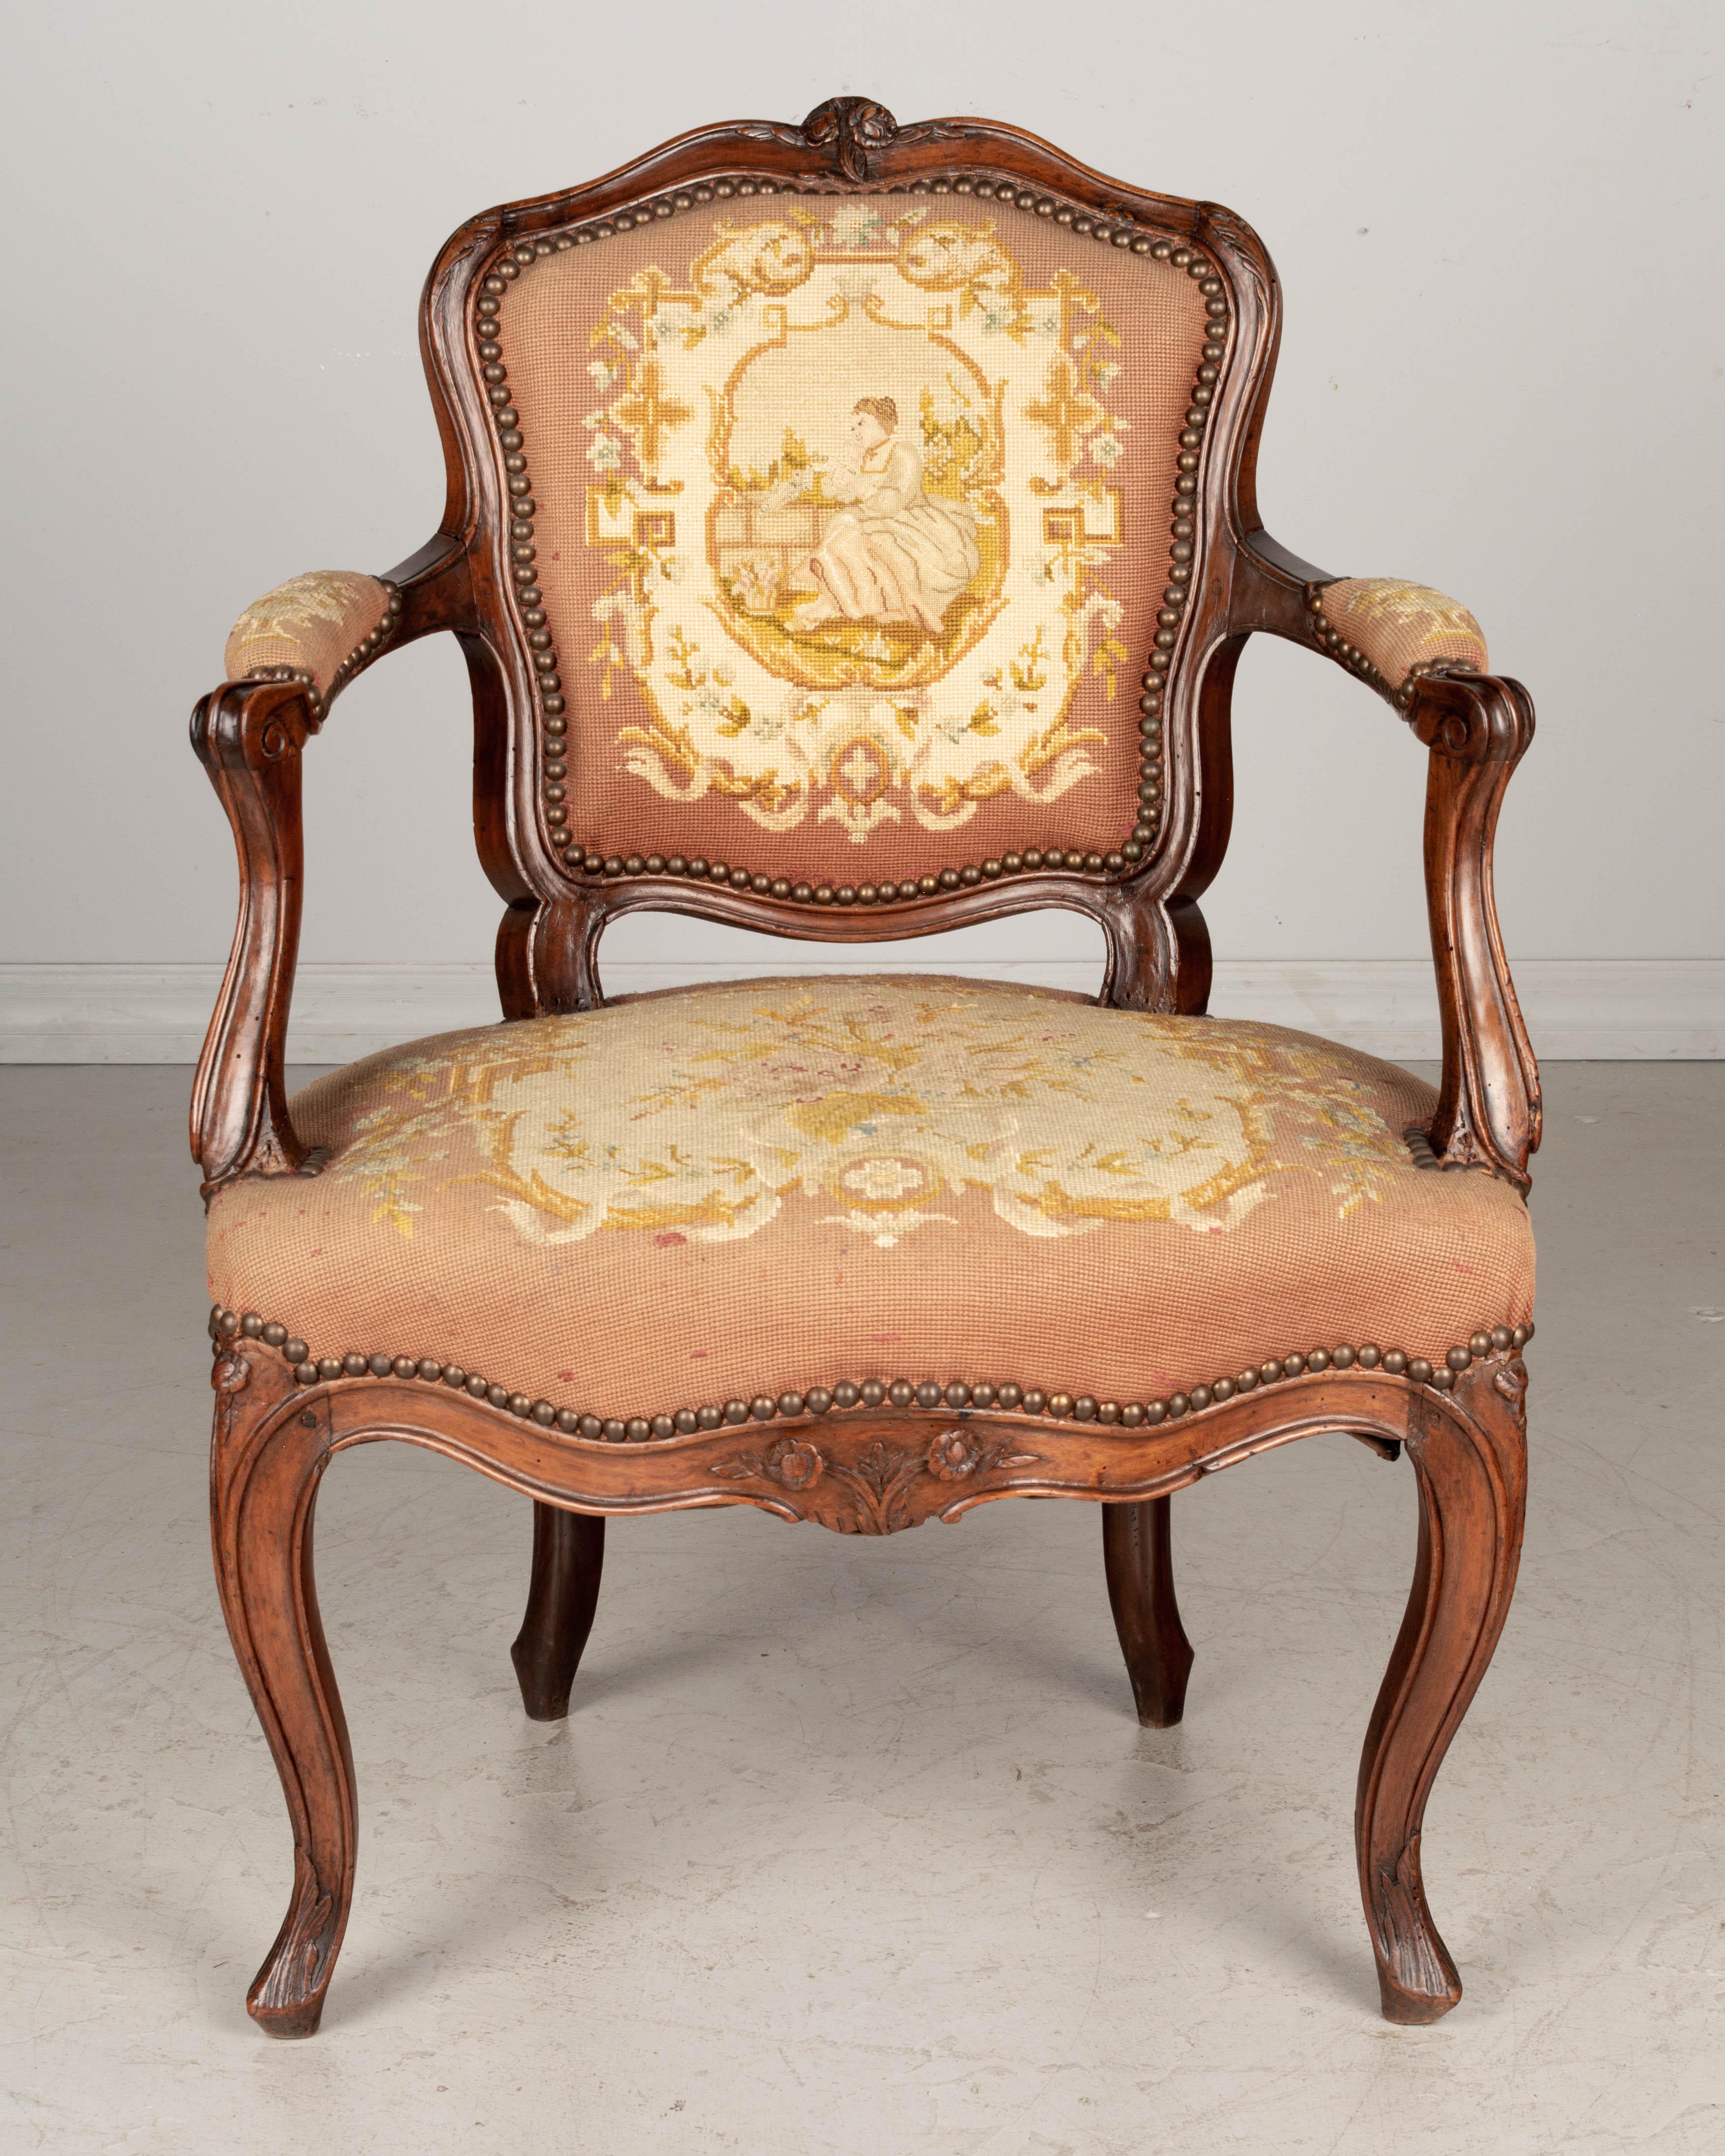 Hand-Crafted 18th Century Louis XV French Fauteuil Armchair For Sale